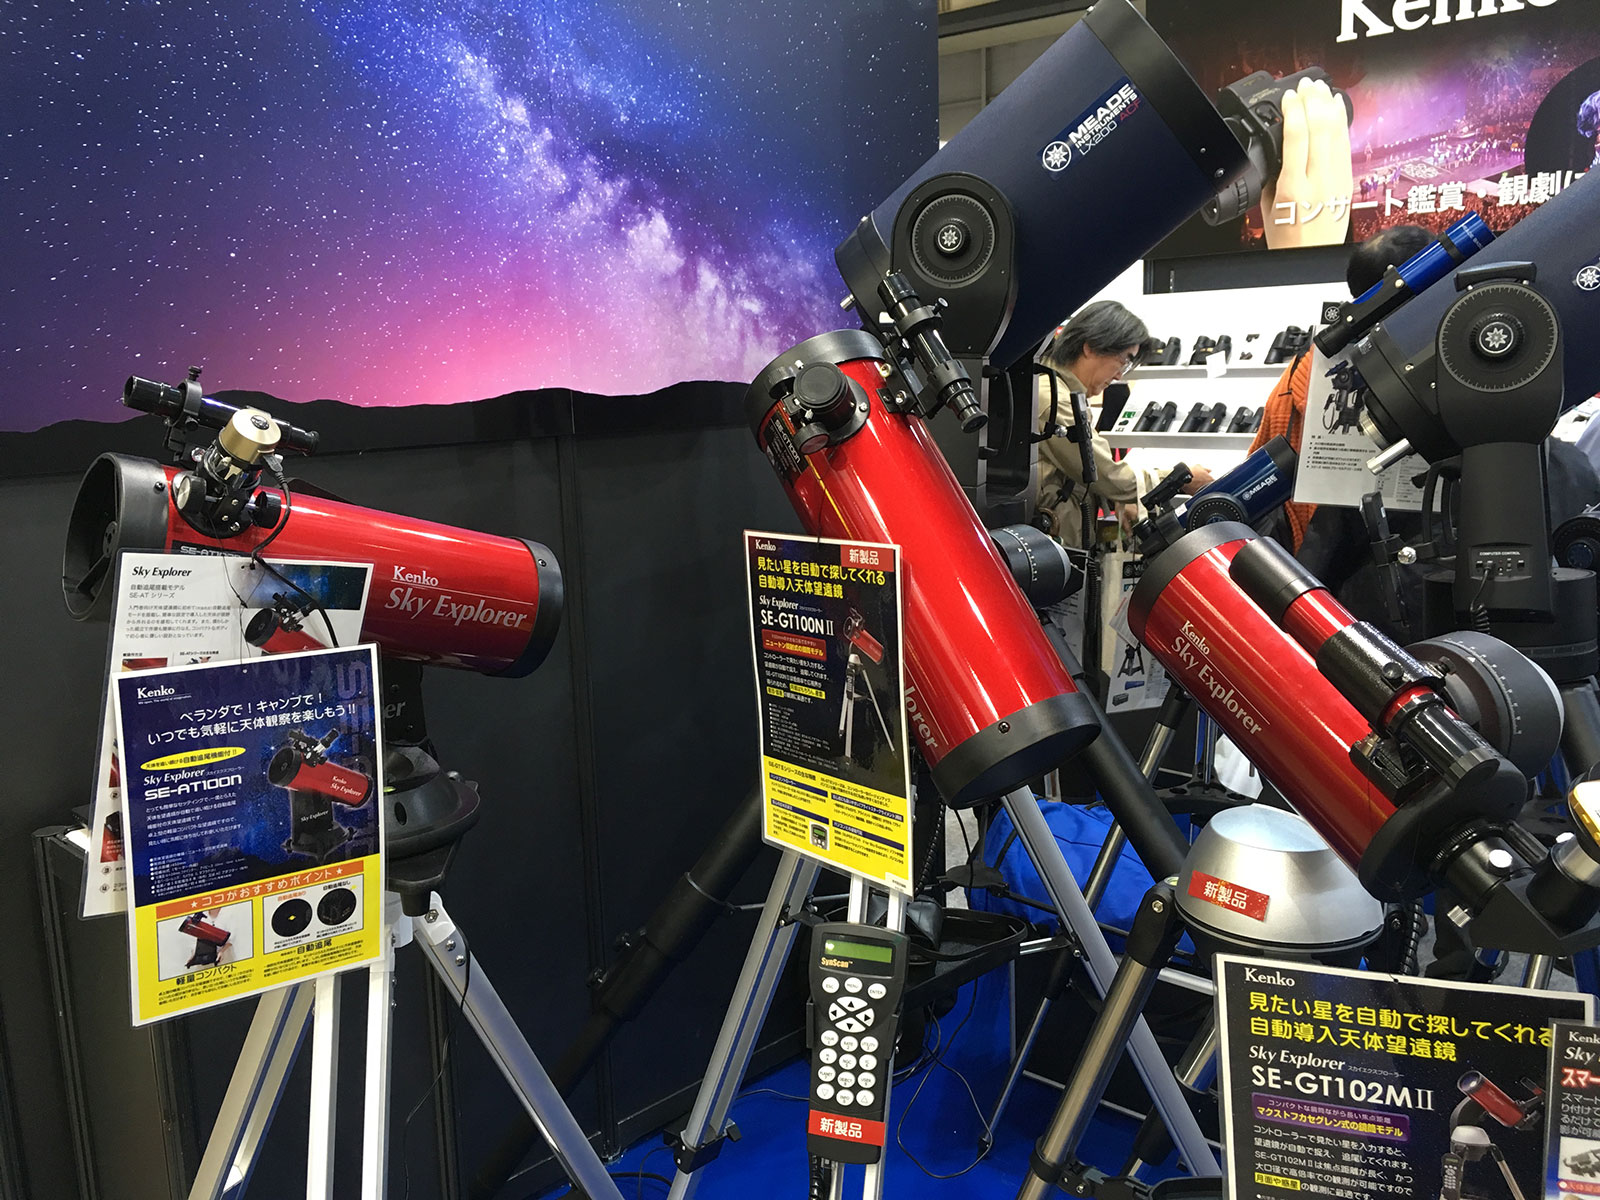 Kenko Sky Explorer series, on the other hand, features beginner-friendly telescope models so compact and easy to be carried you could use them out on the fields or comfortably on your veranda.